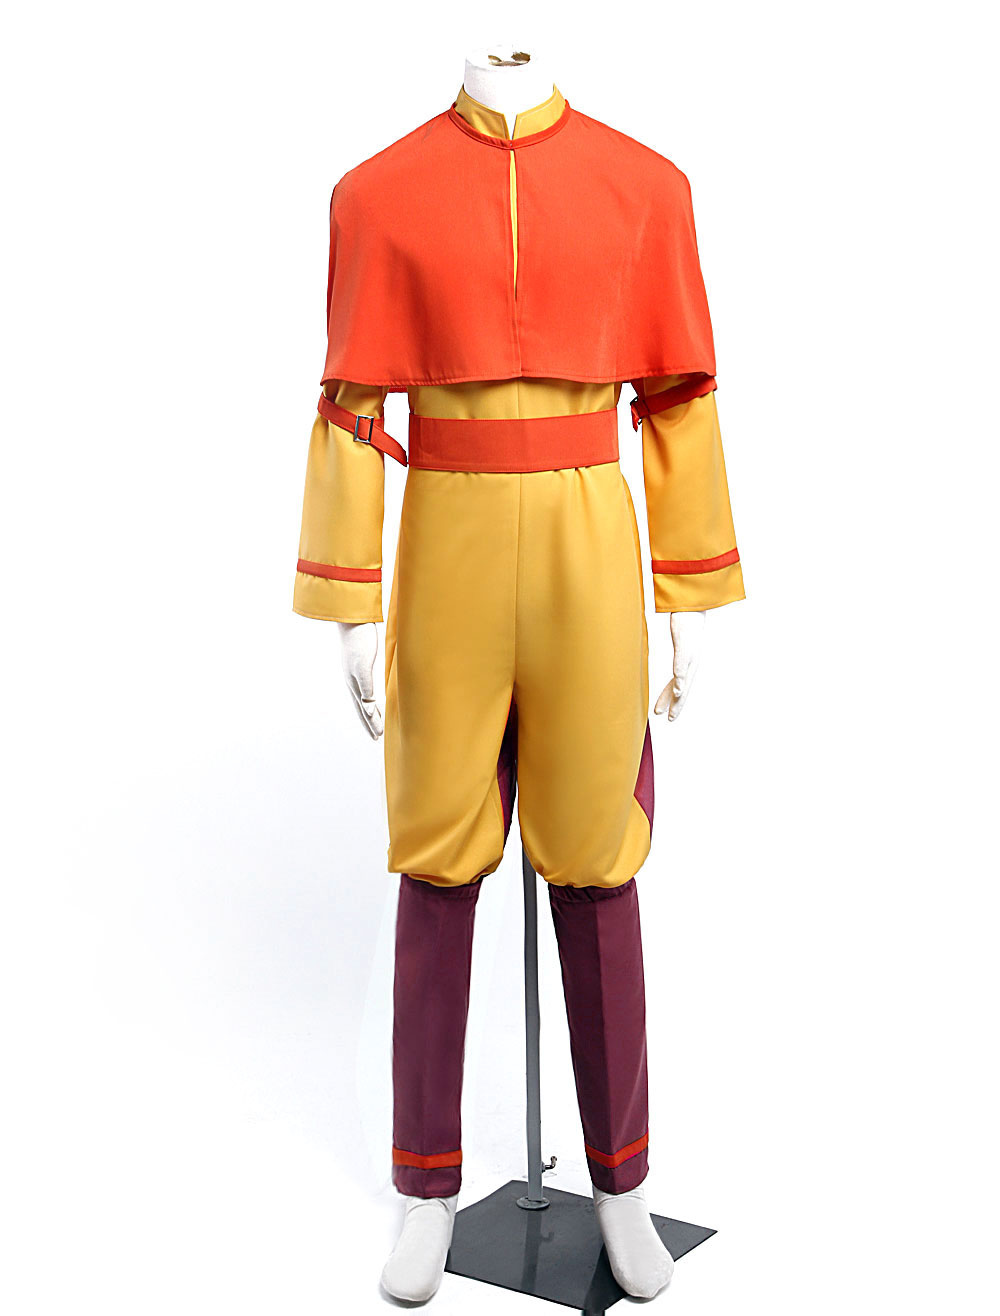 lease Canteen Blind faith Avatar Aang Cosplay Costume - Cosplayshow.com